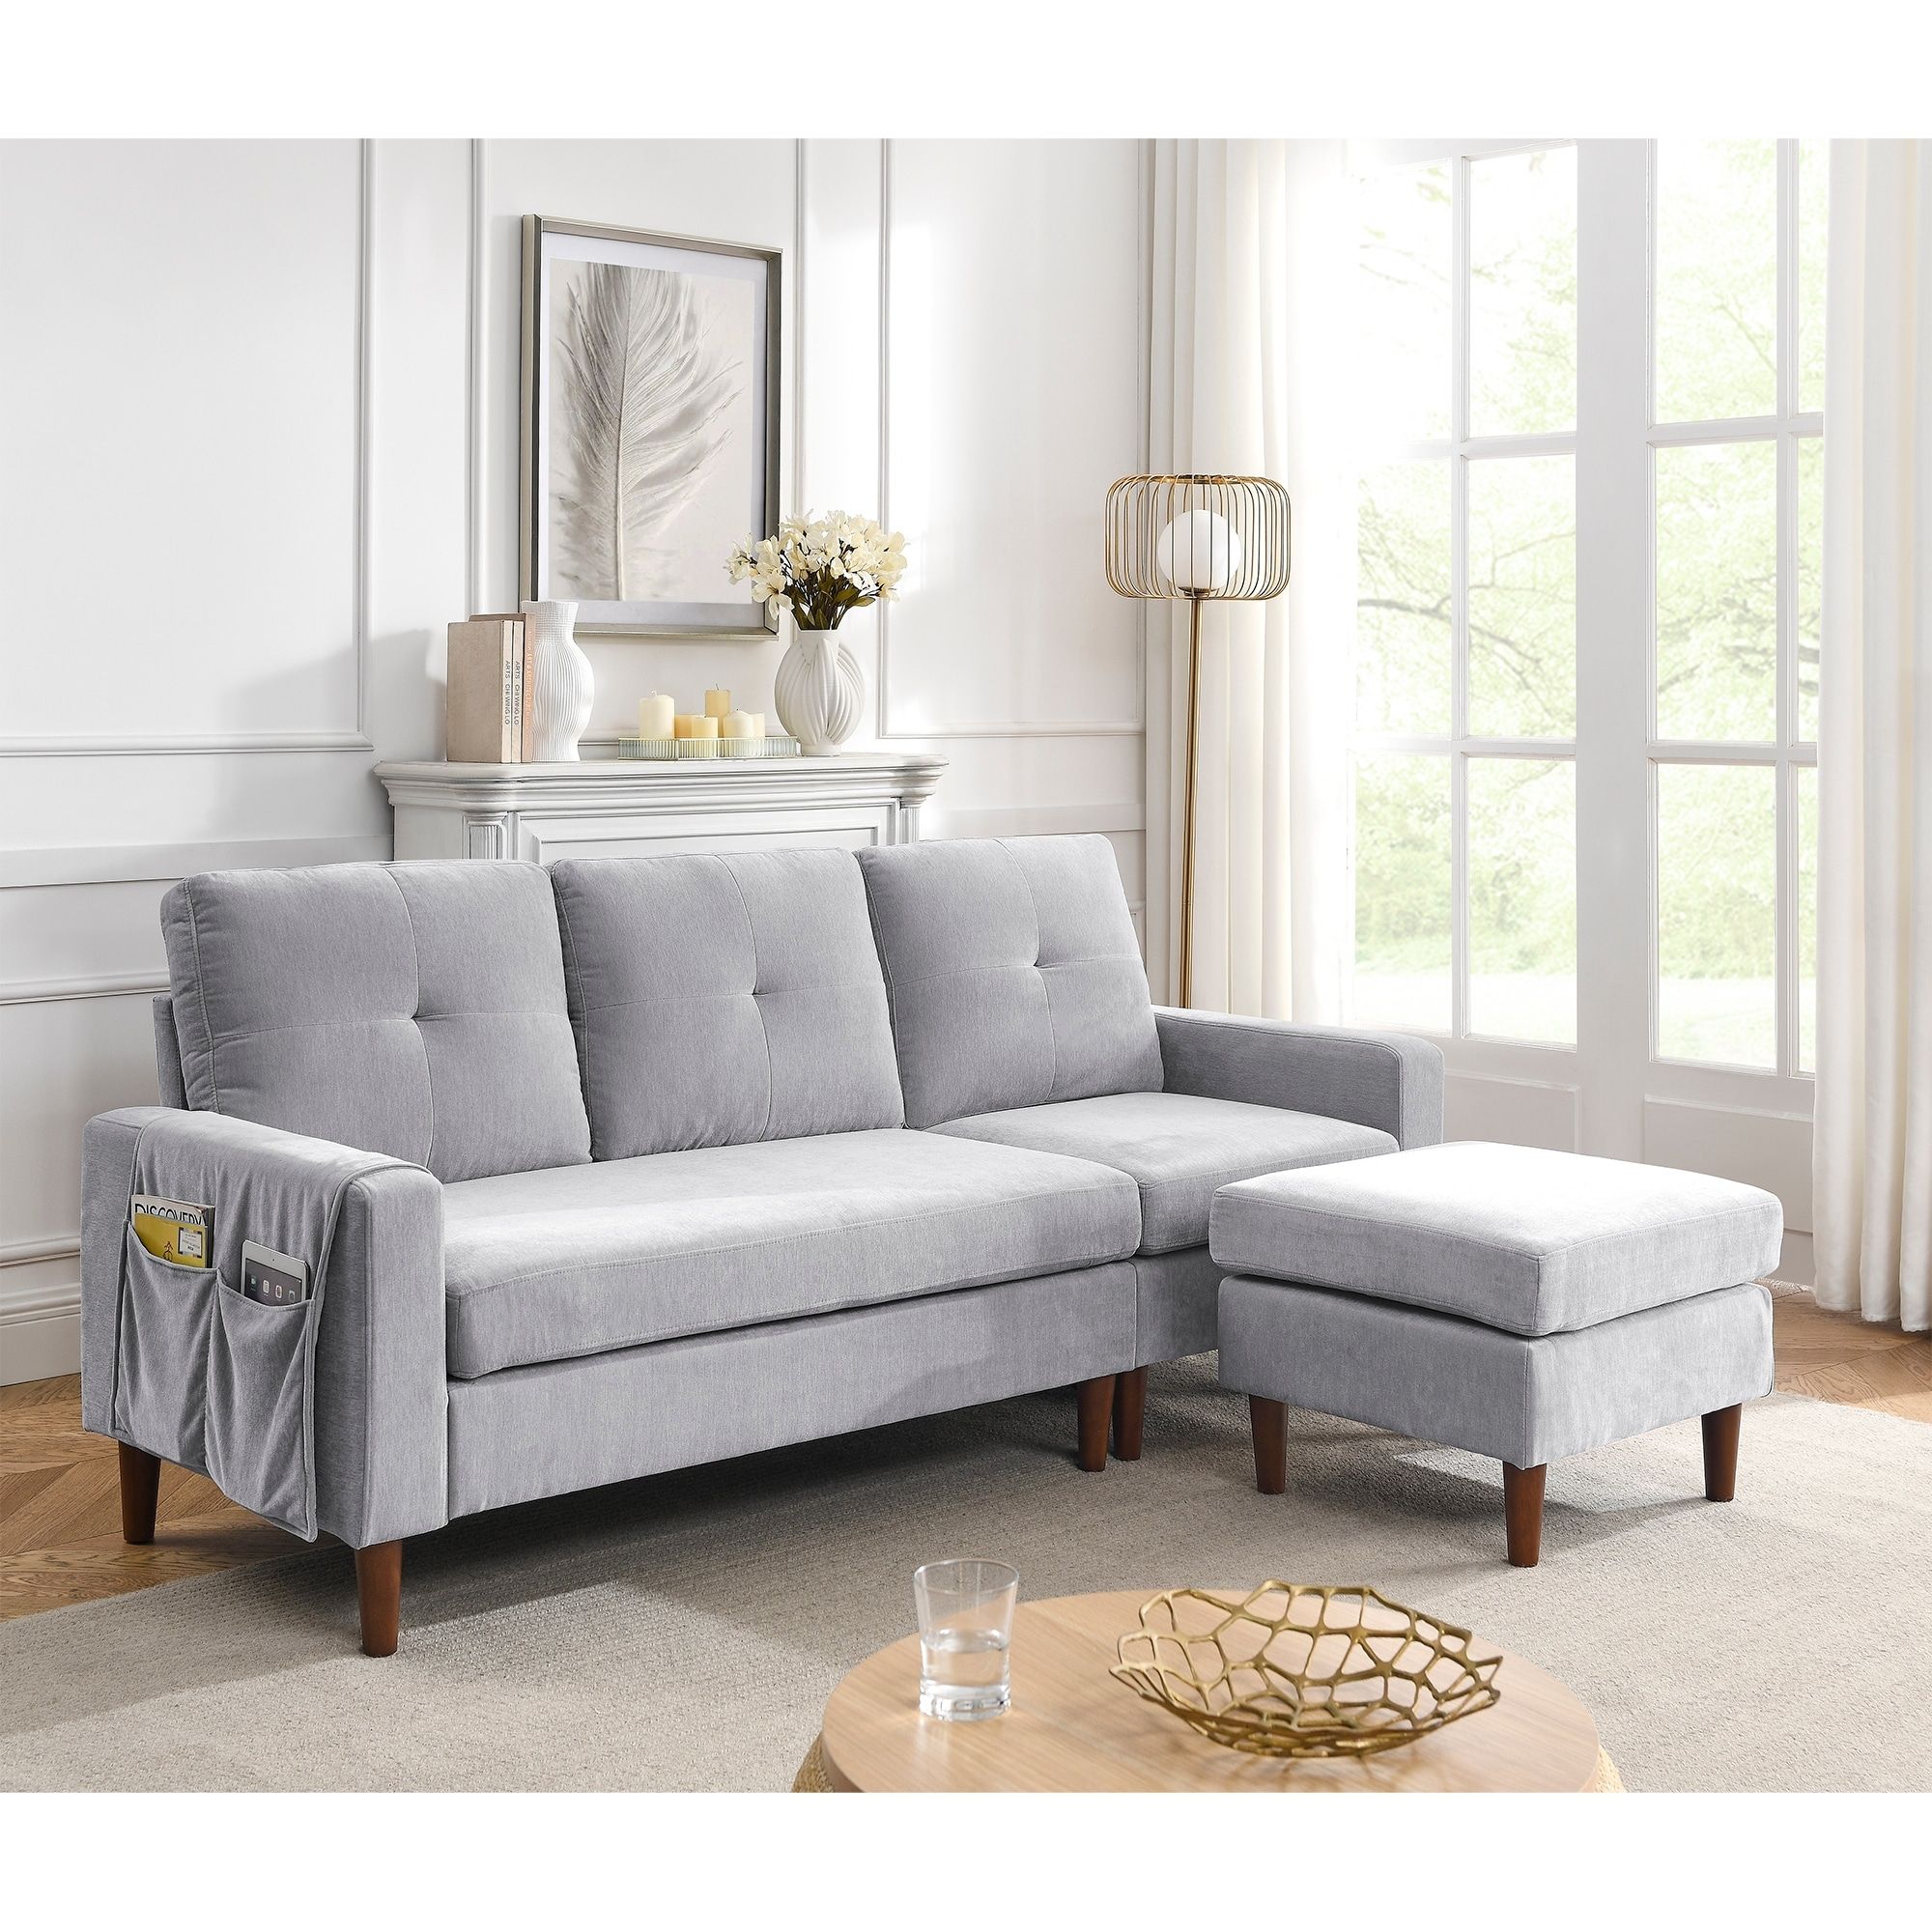 Convertible Sectional Sofa Chenille Couch, 3 Seats L Shape Sofa With  Removable Cushions – Bed Bath & Beyond – 36921140 In 3 Seat Convertible Sectional Sofas (View 15 of 15)